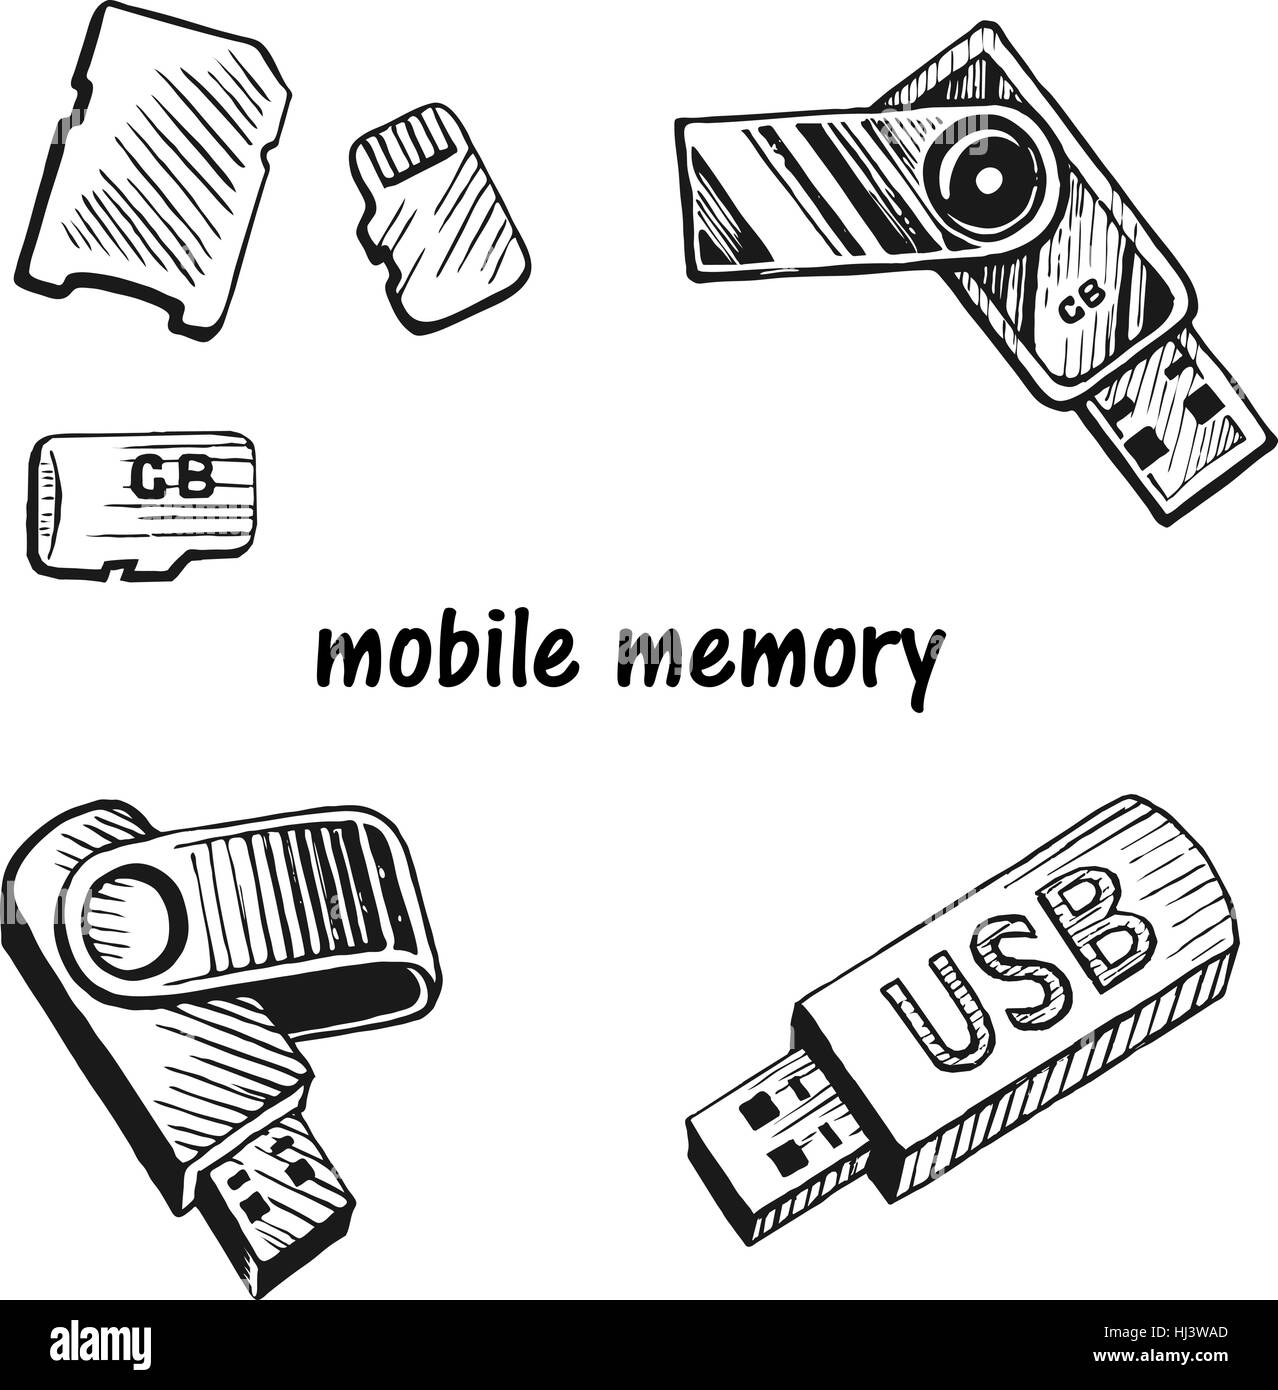 USB stick  and memory card  set Stock Vector